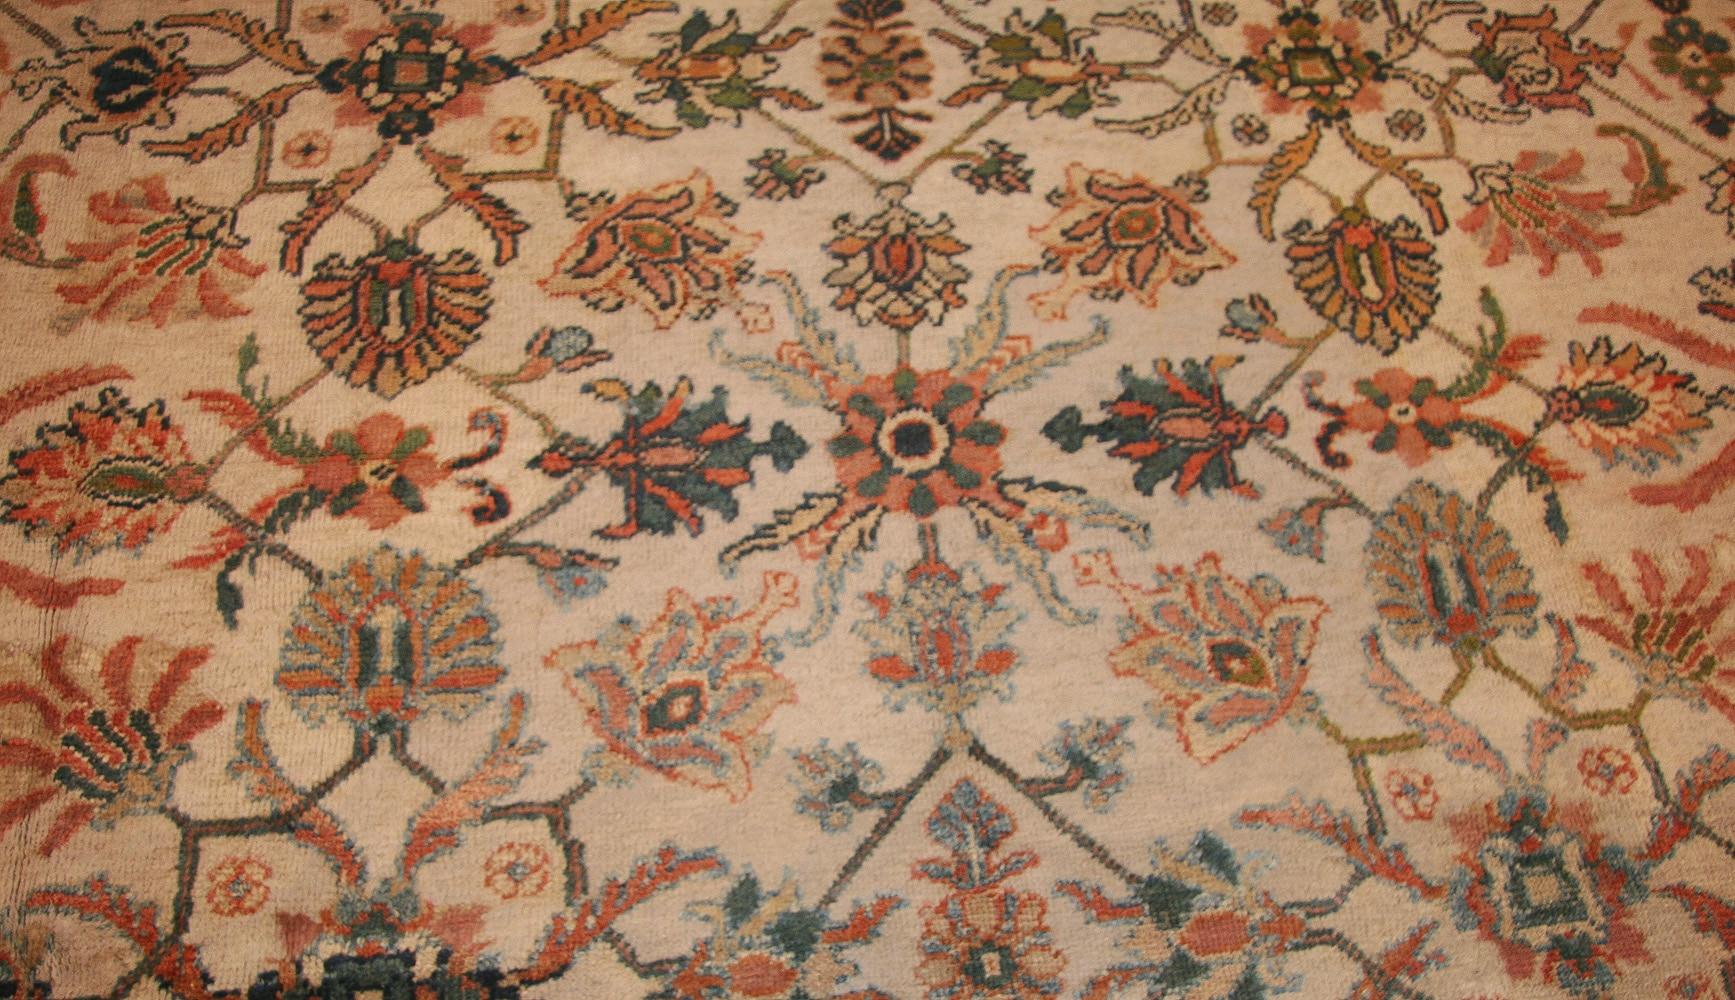 An Elegant Decorative Antique Persian Sultanabad Rug, Country of Origin / rug type: Persian Rugs, Circa date: 1920’s. Size: 8 ft 7 in x 11 ft 7 in (2.62 m x 3.53 m)